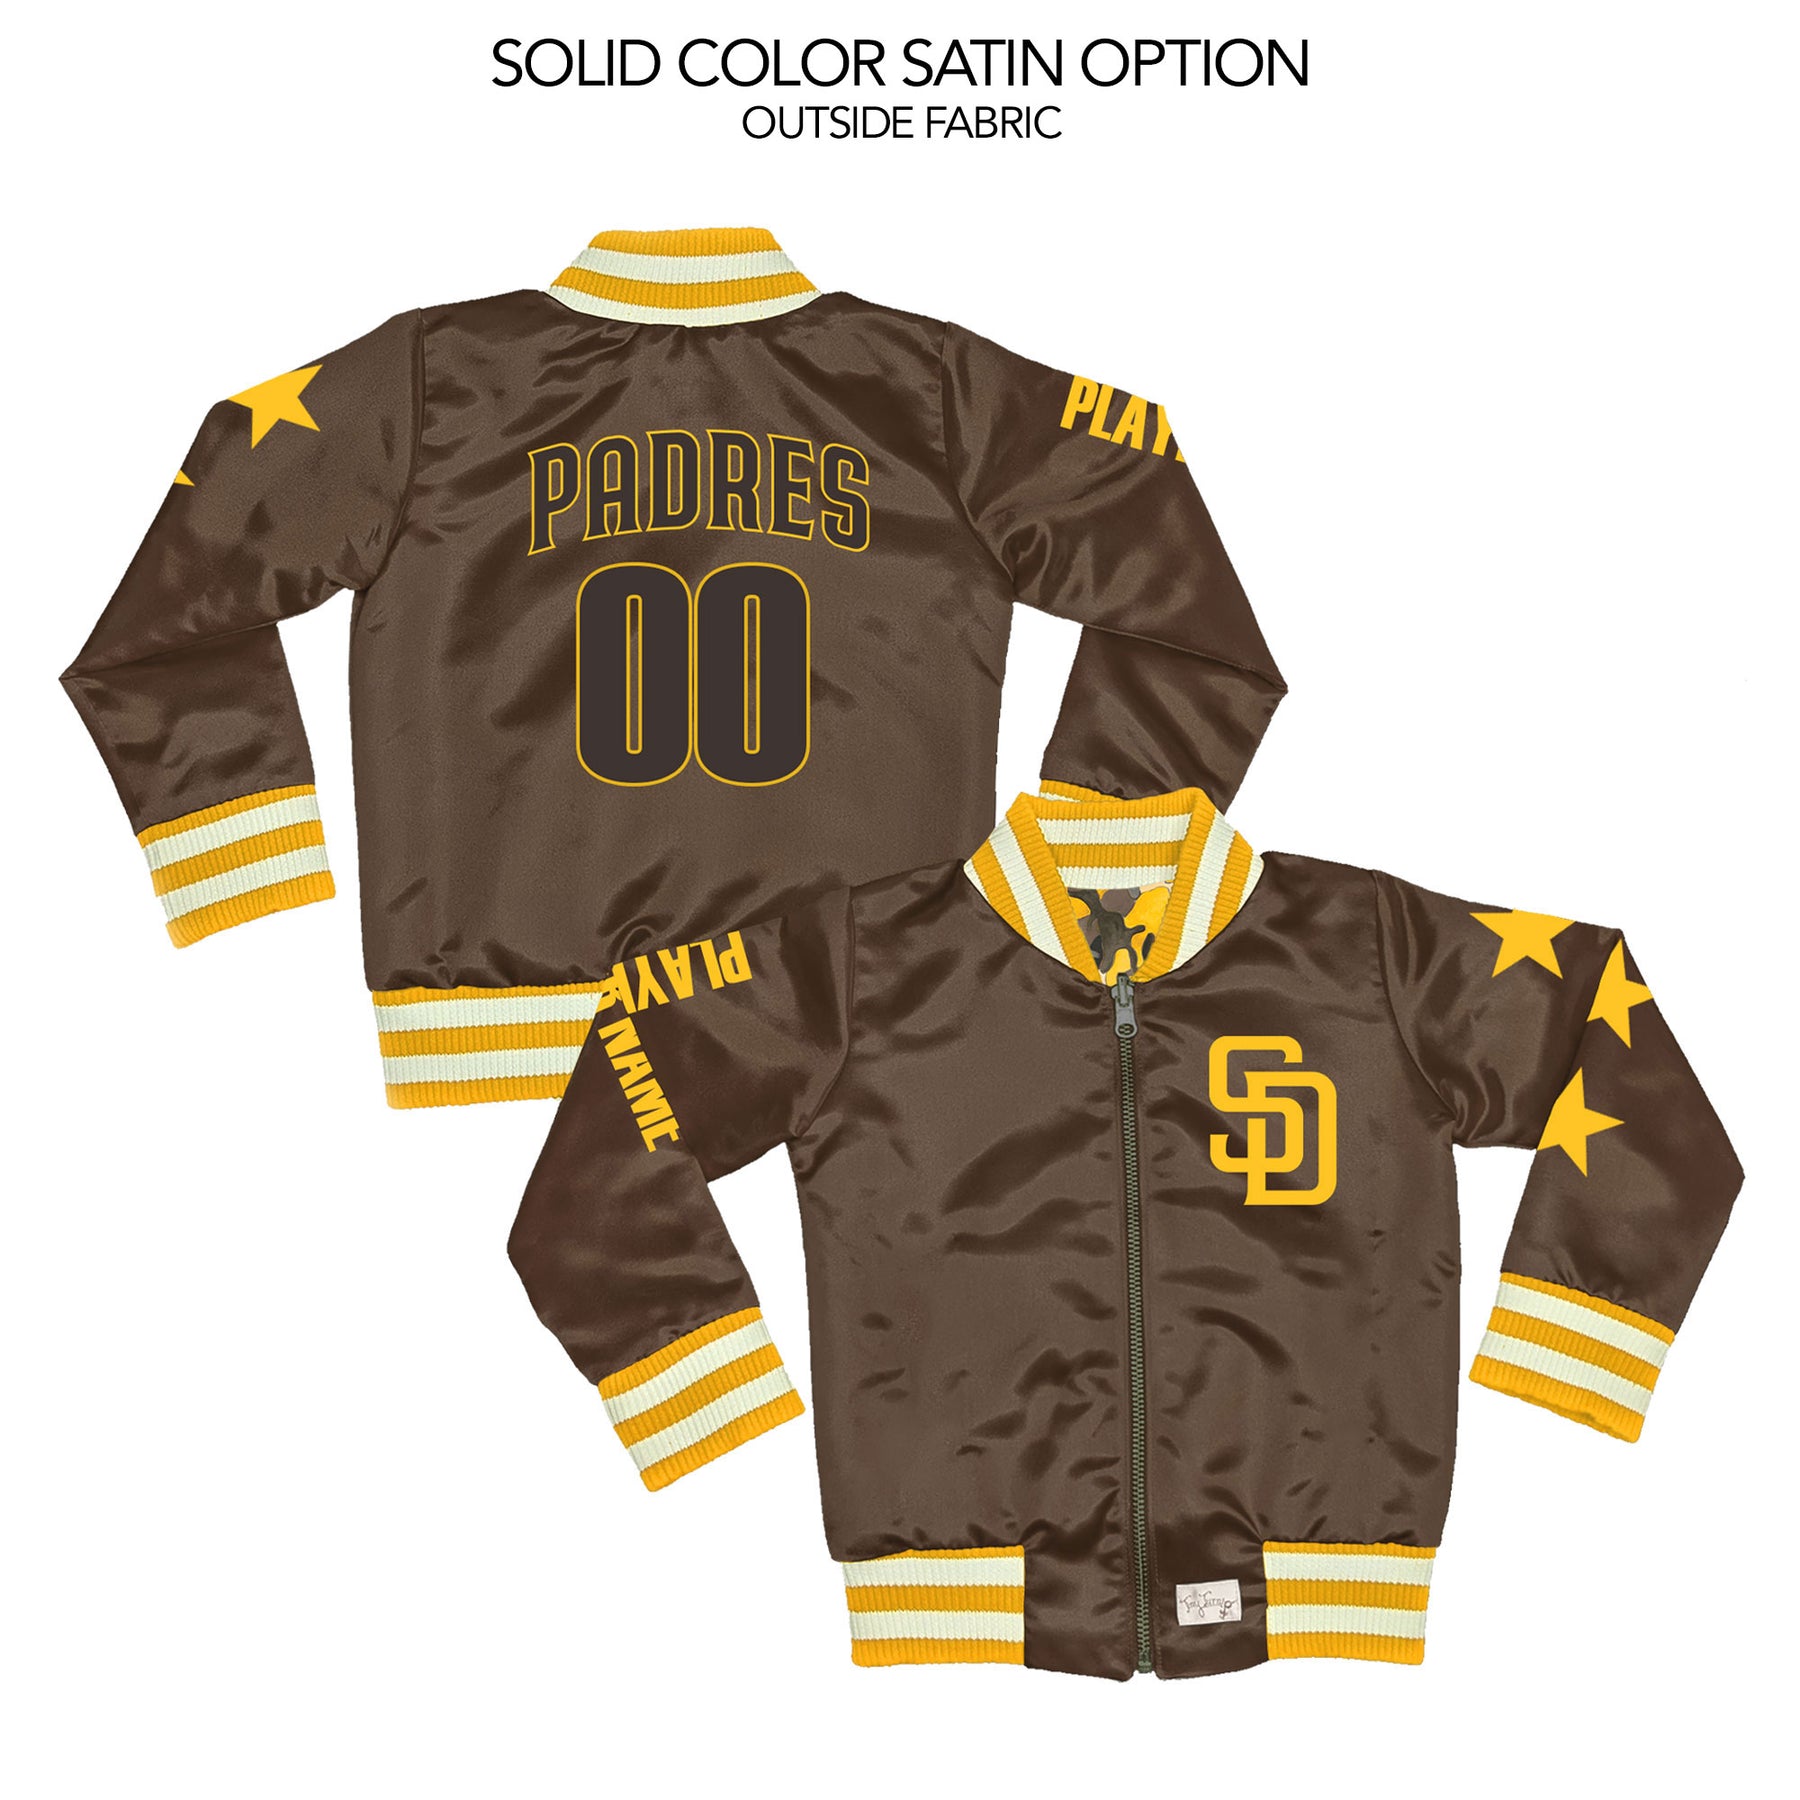 San Diego Padres Bomber Brown and White Jacket